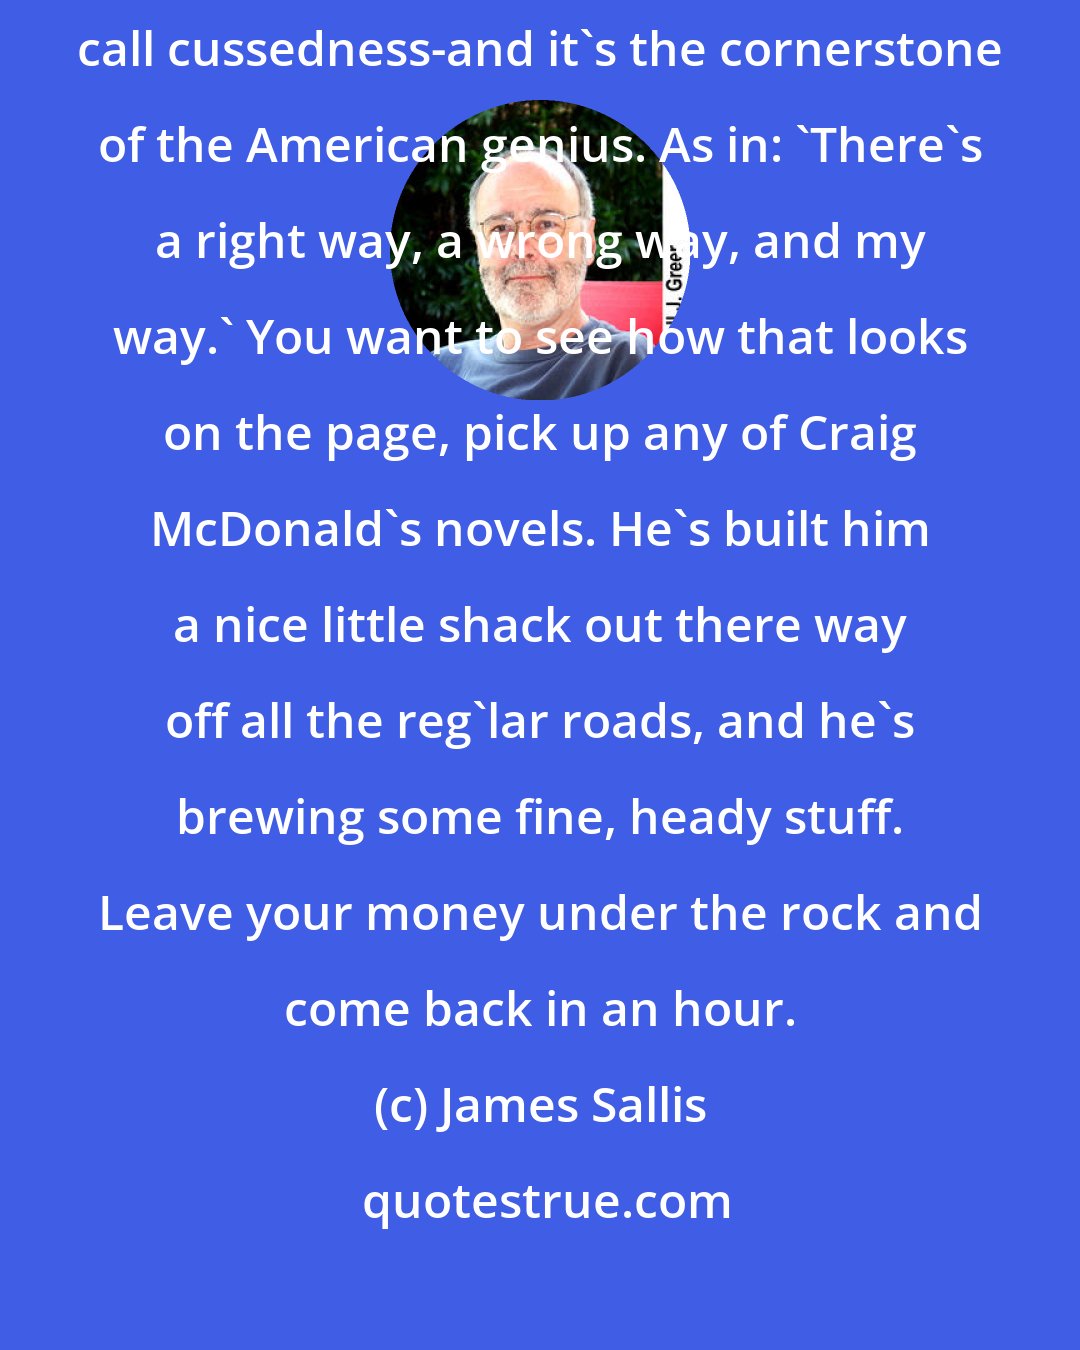 James Sallis: What critics might call eclectic, and Eastern folks quirky, we Southerners call cussedness-and it's the cornerstone of the American genius. As in: 'There's a right way, a wrong way, and my way.' You want to see how that looks on the page, pick up any of Craig McDonald's novels. He's built him a nice little shack out there way off all the reg'lar roads, and he's brewing some fine, heady stuff. Leave your money under the rock and come back in an hour.